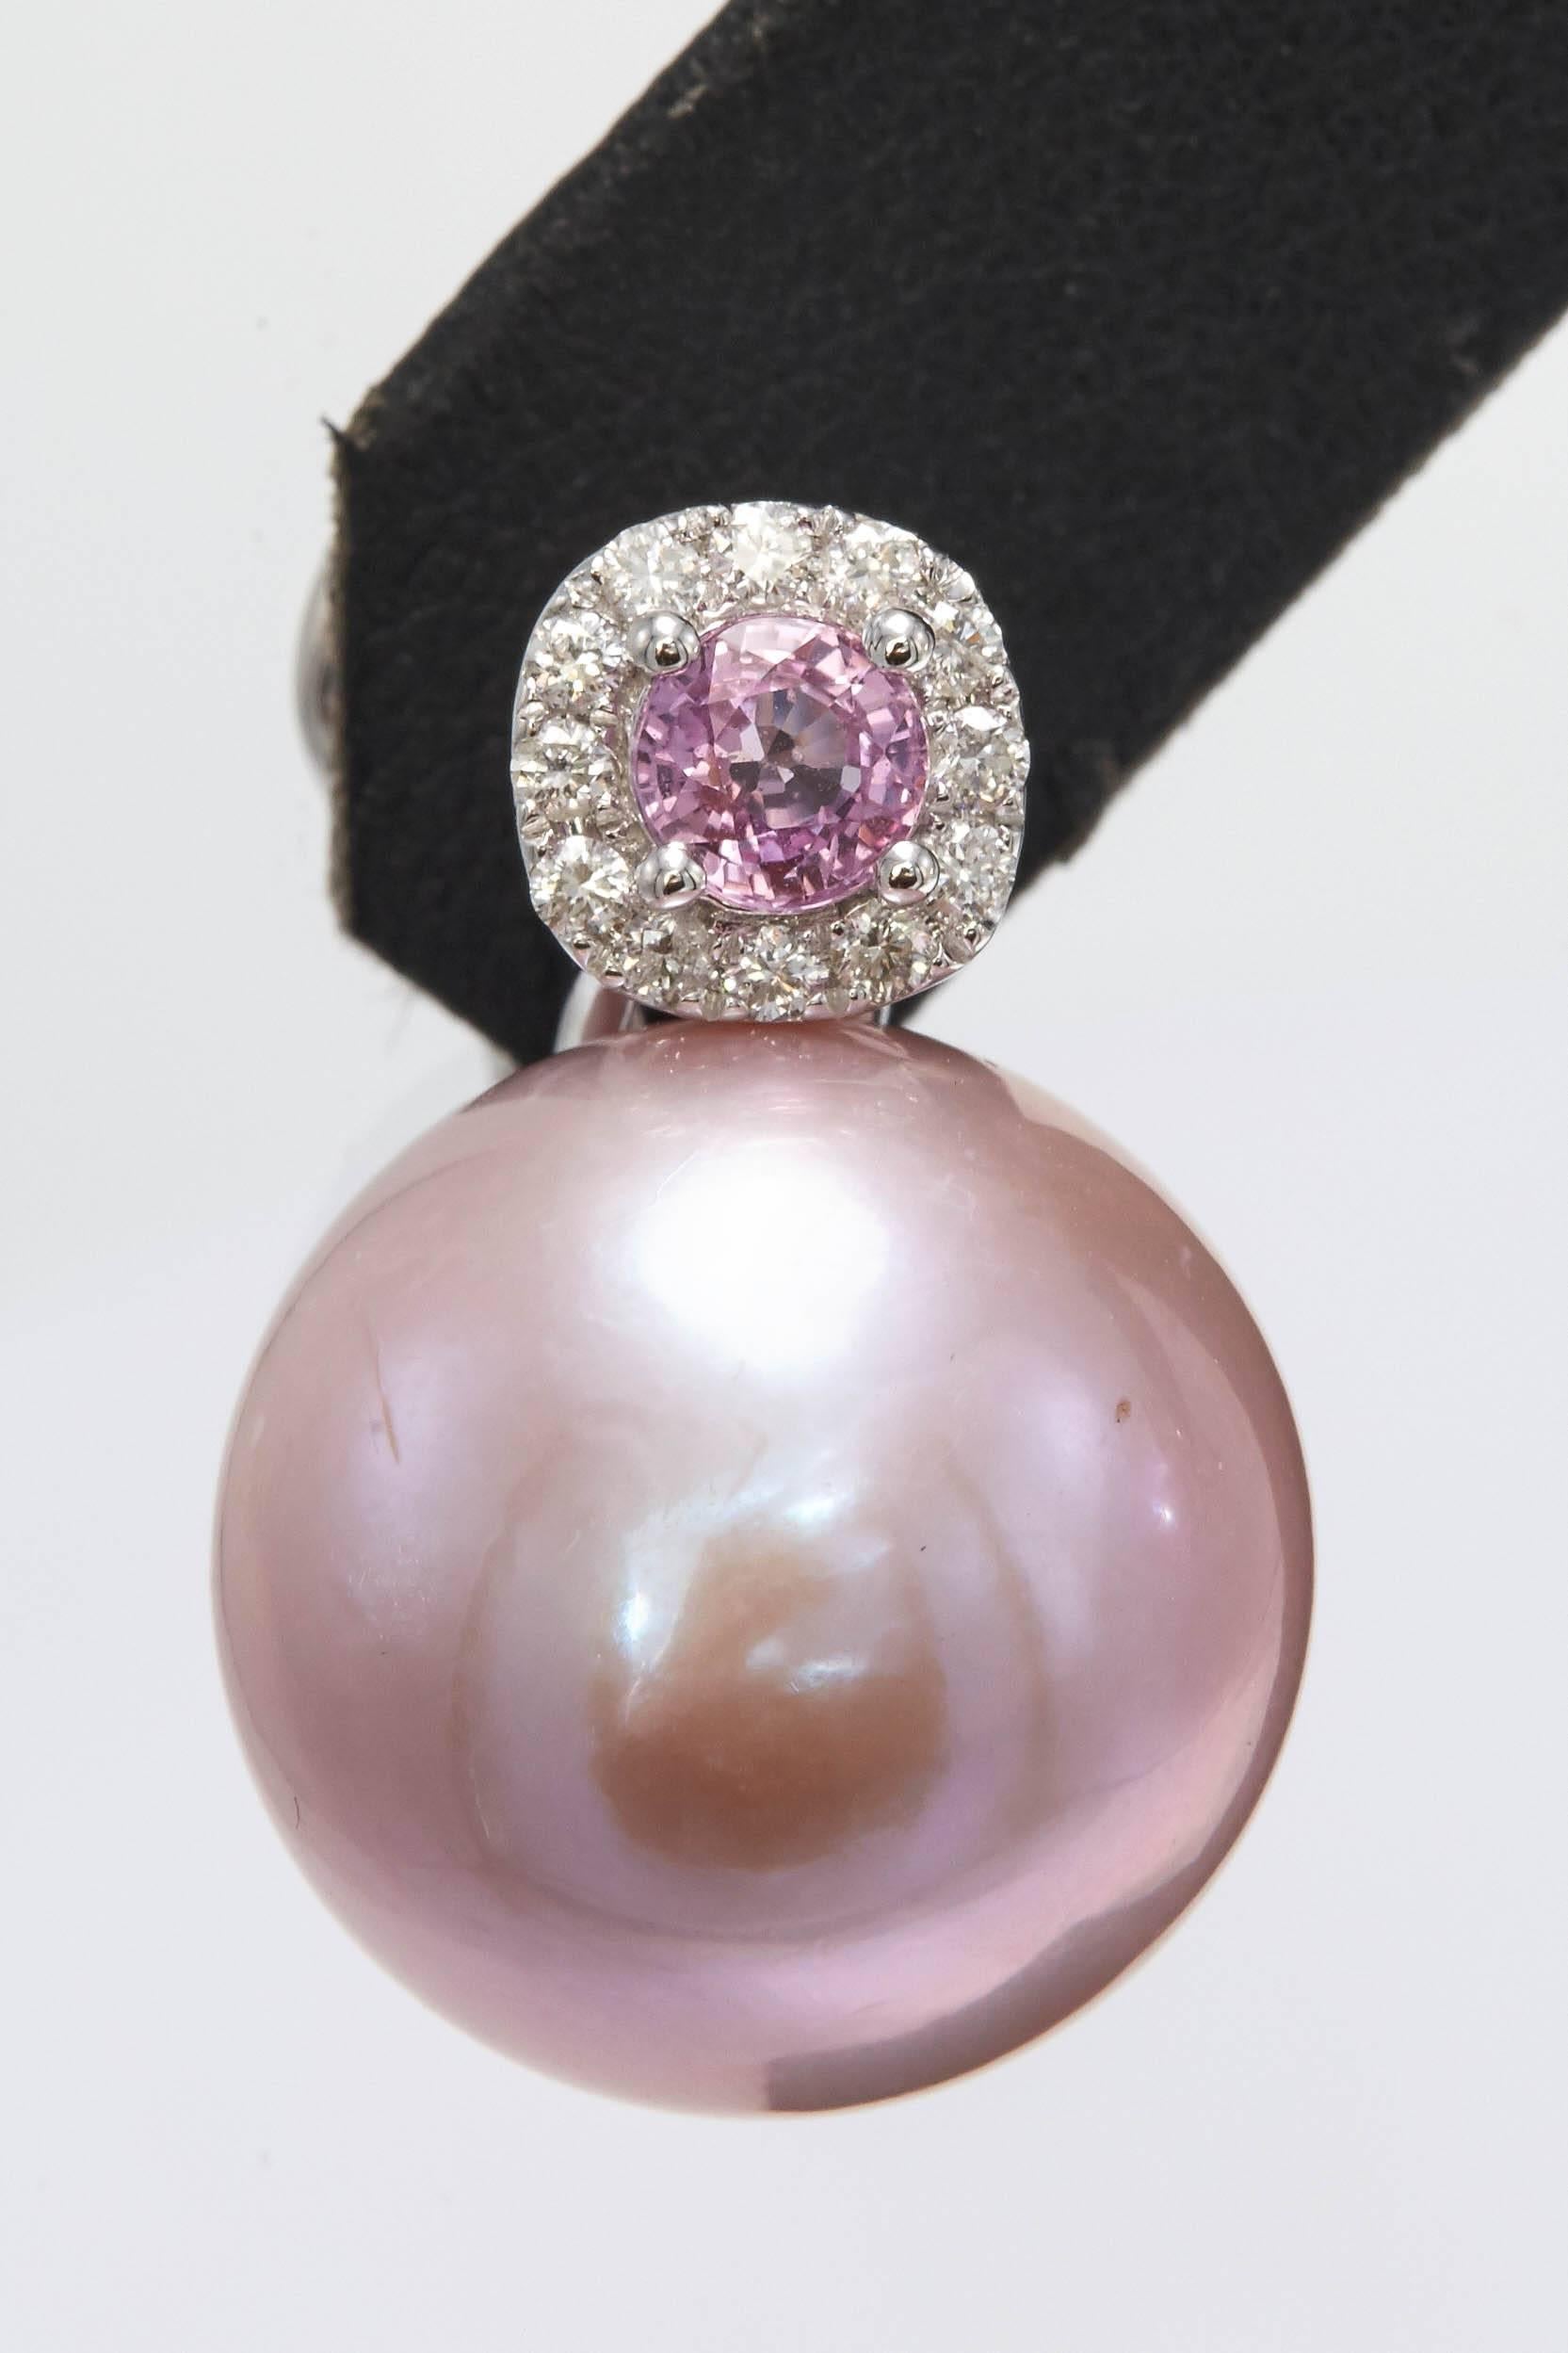 18K white Gold
Pink freshwater pearl 14-15 mm 
Pink Sapphire 0.65 cts.
Diamonds: 0.24 Cts.
Available in other gold & Pearl colors